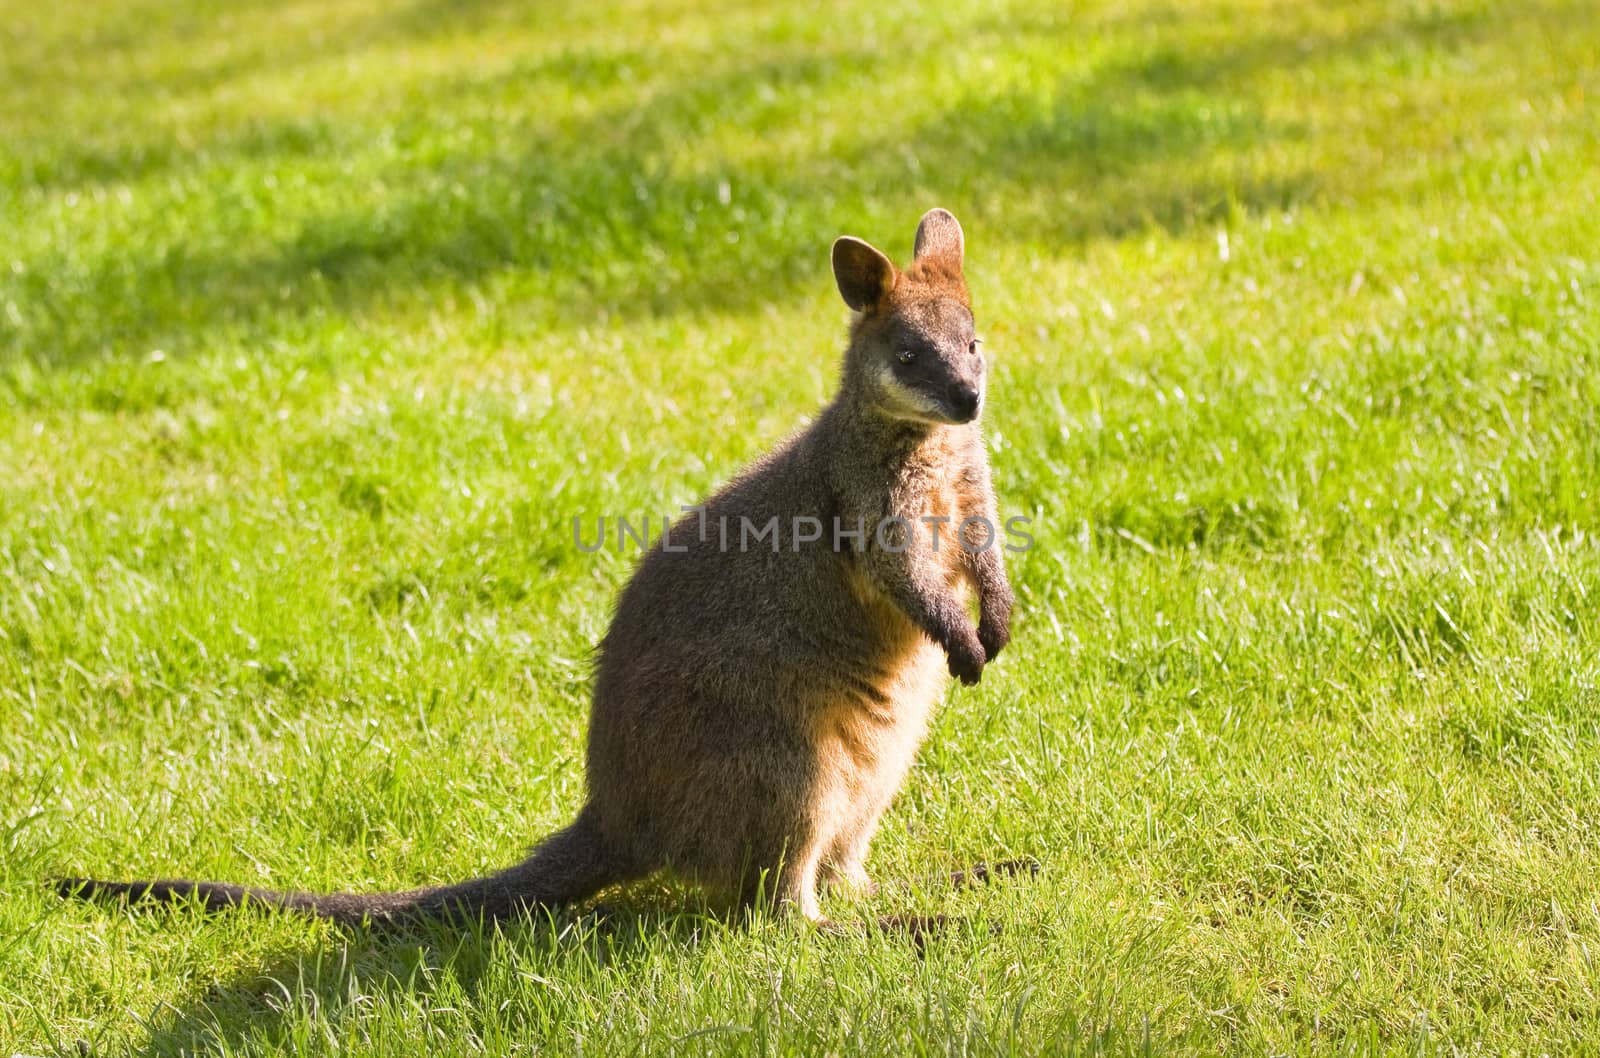 Swamp- or Black Wallaby standing on grassland in morning sunshine